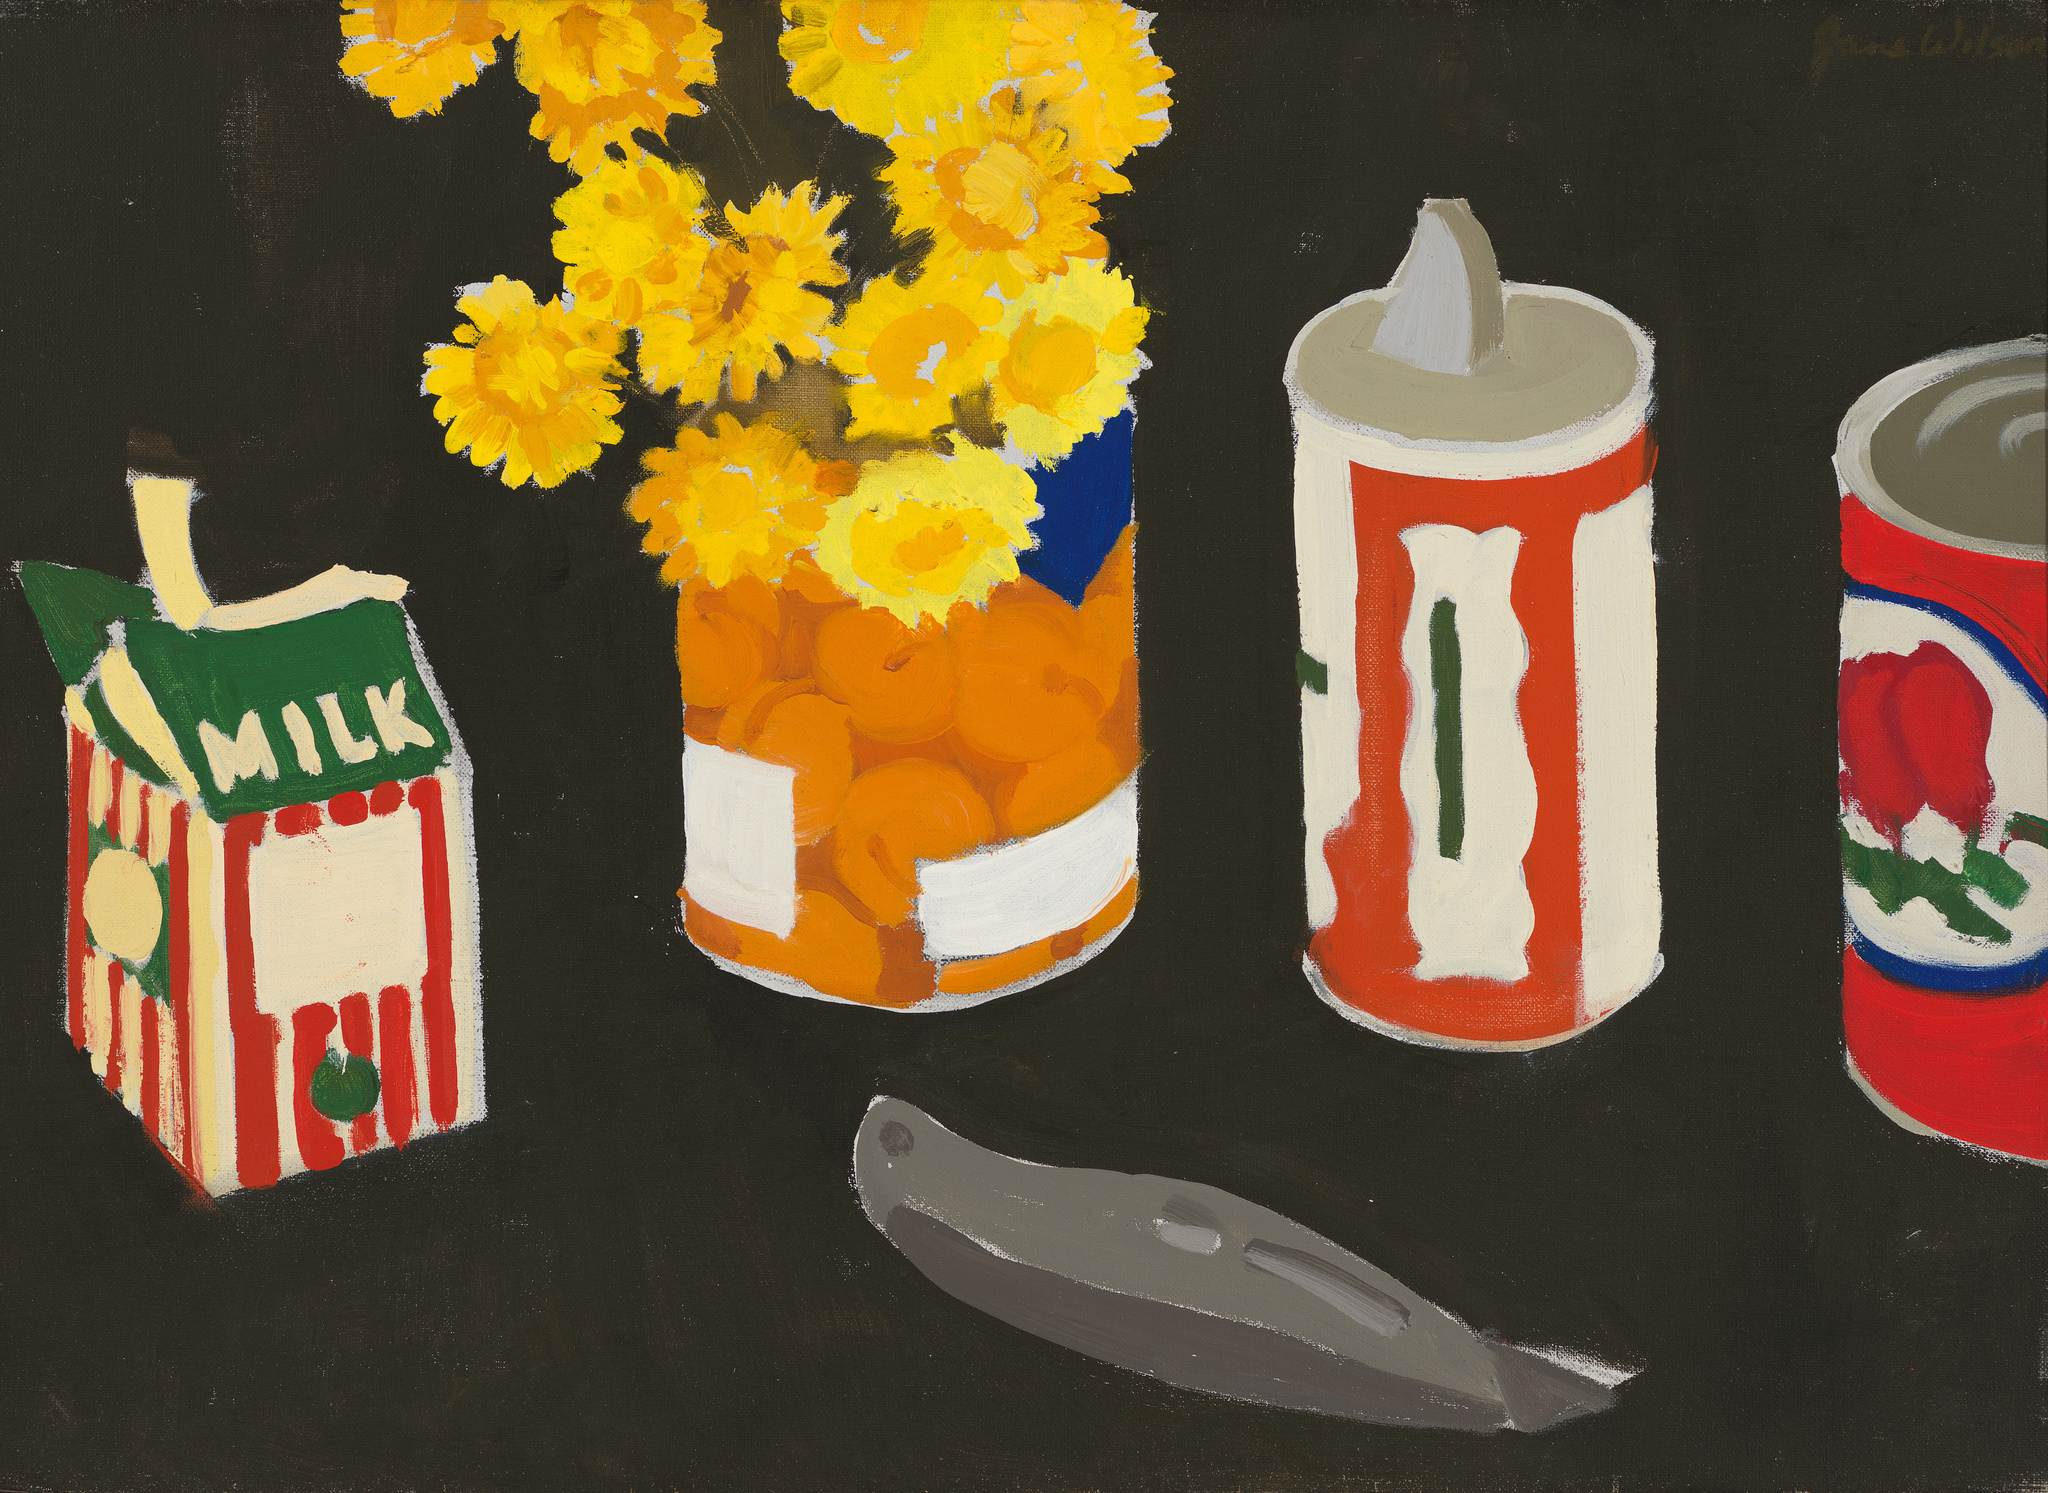 A row of colorful food cans and cartons, one holding yellow flowers, with a pocket knife placed in front of them.